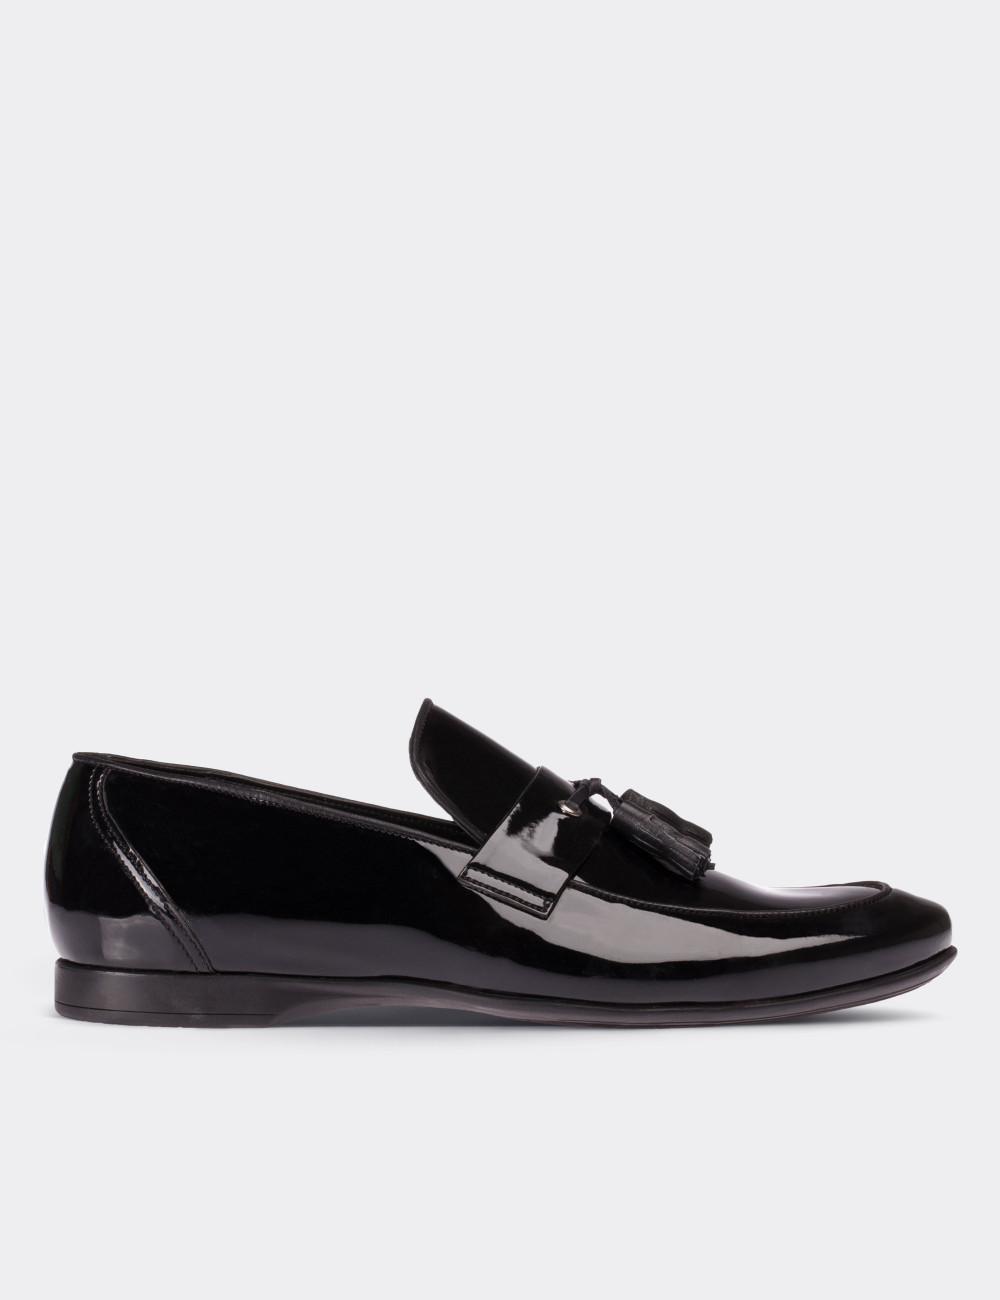 Black Patent Leather Loafers - Deery